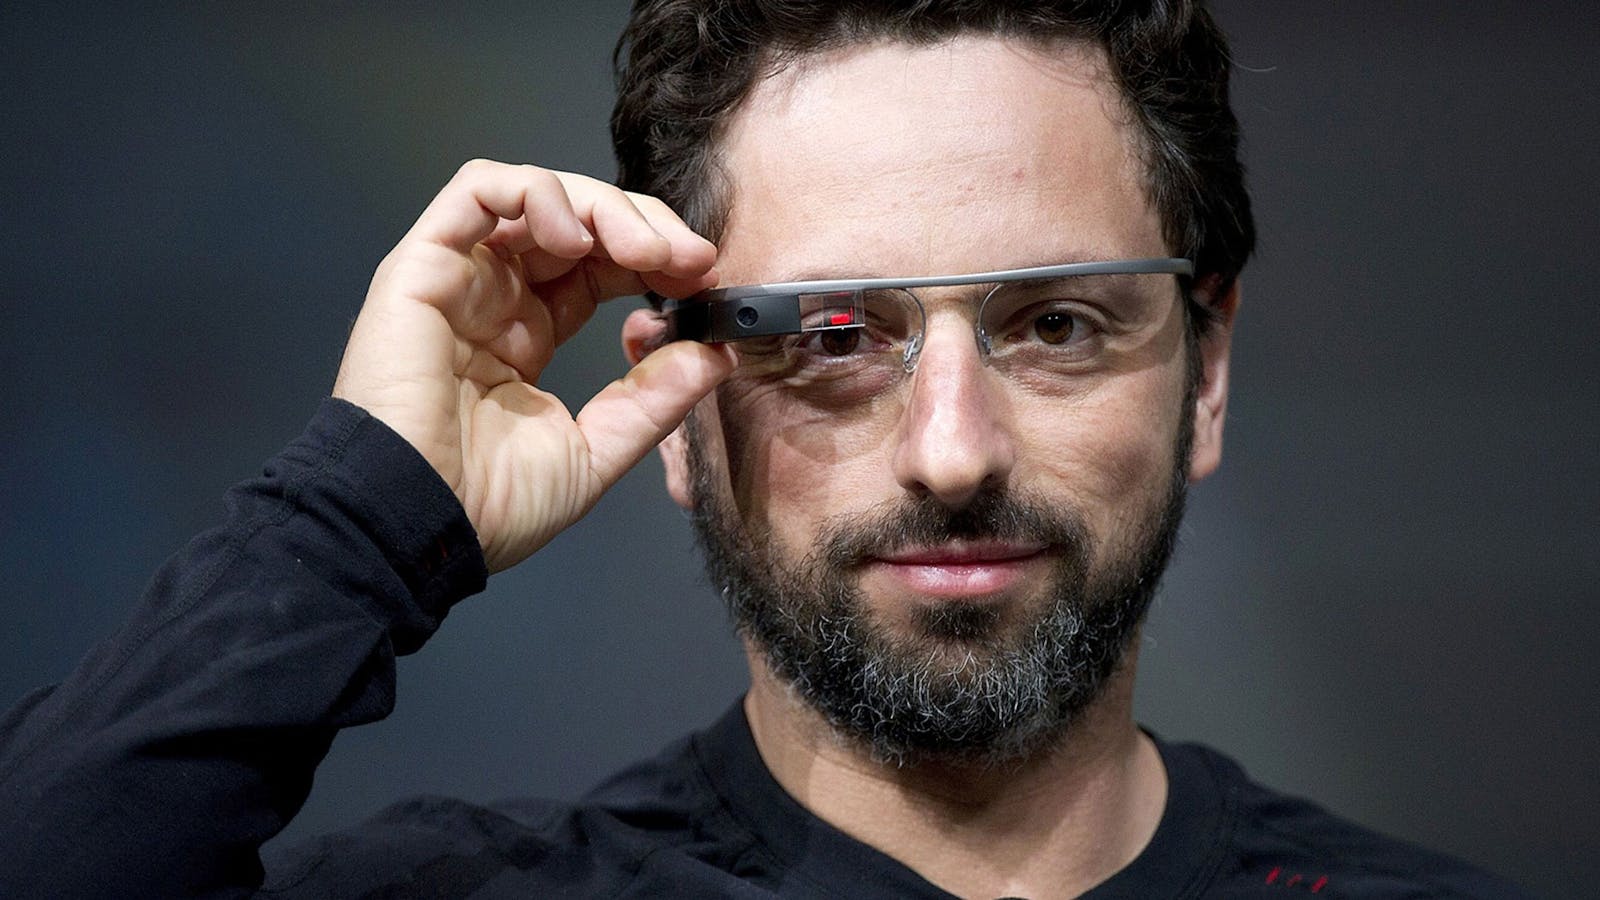 Google co-founder Sergey Brin wearing Google Glass, the company's failed consumer smart glasses, a decade ago.